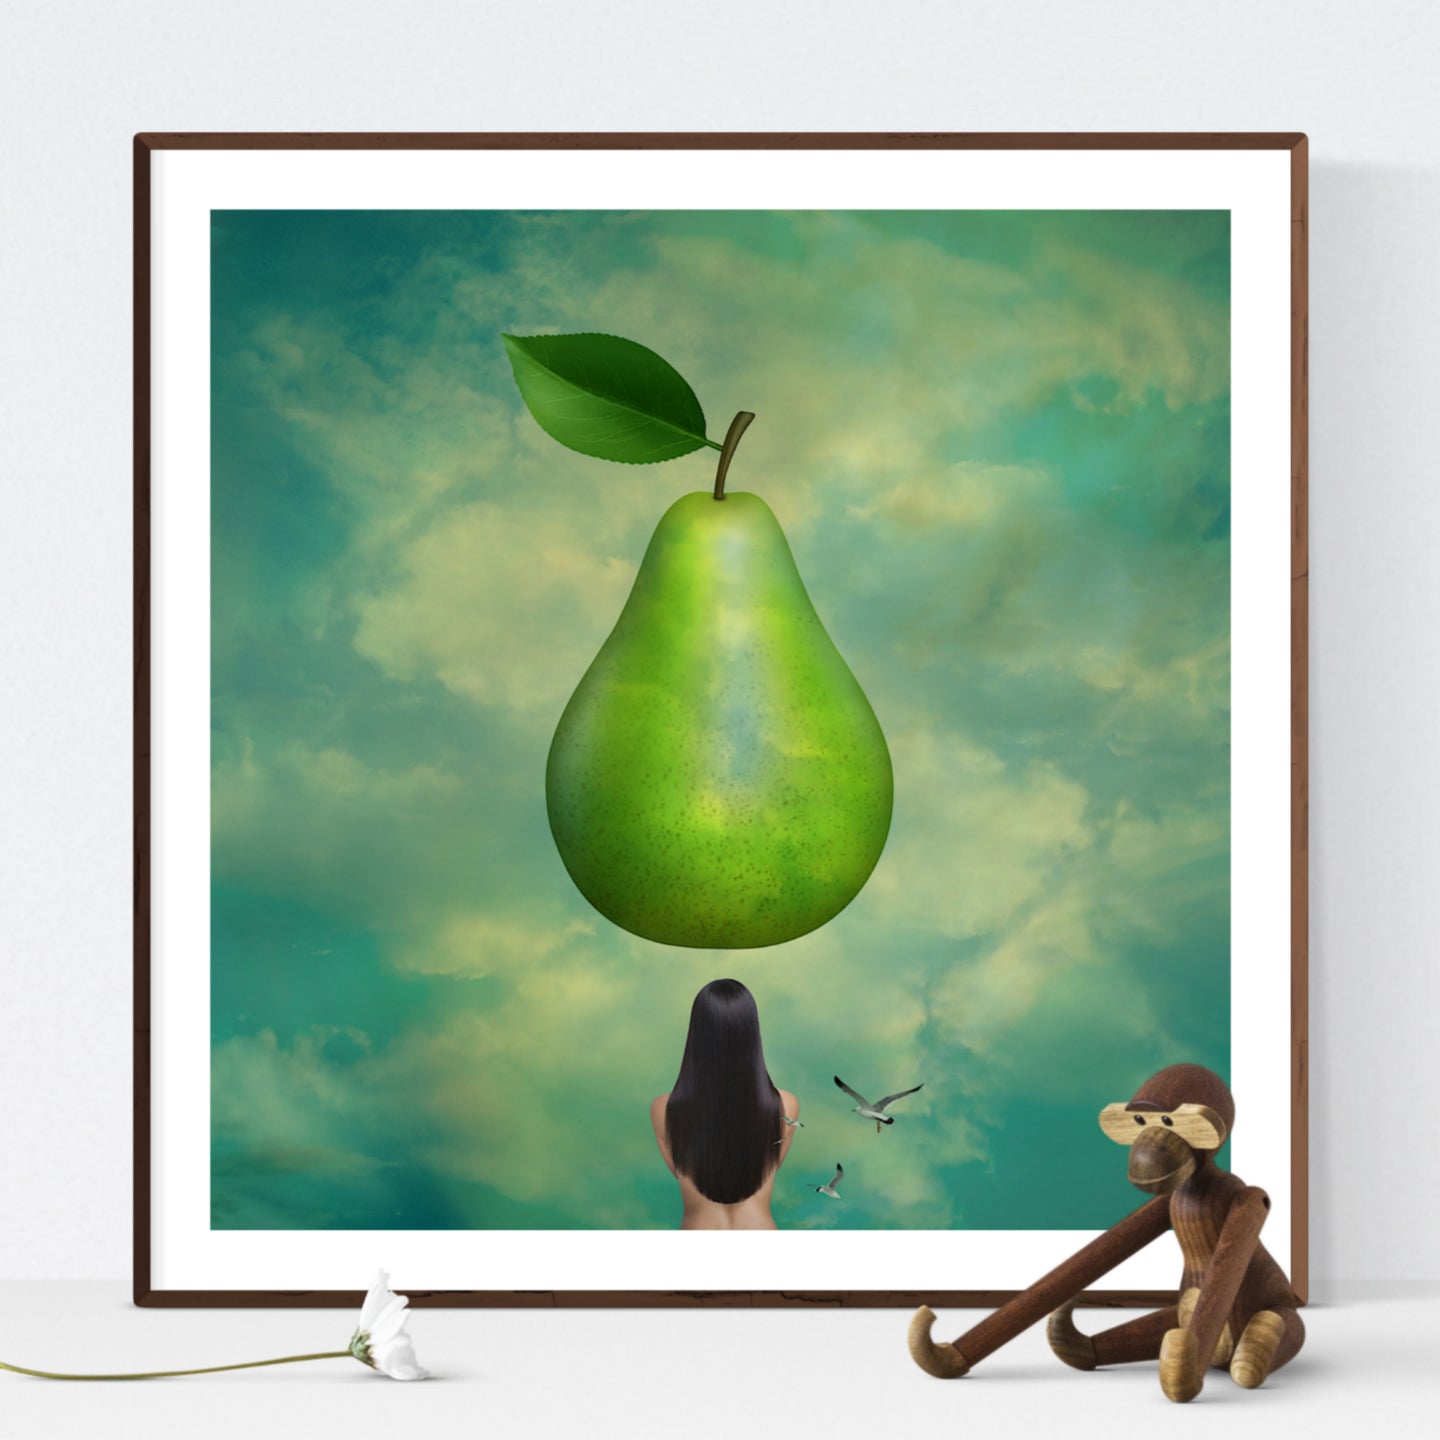 The Pear